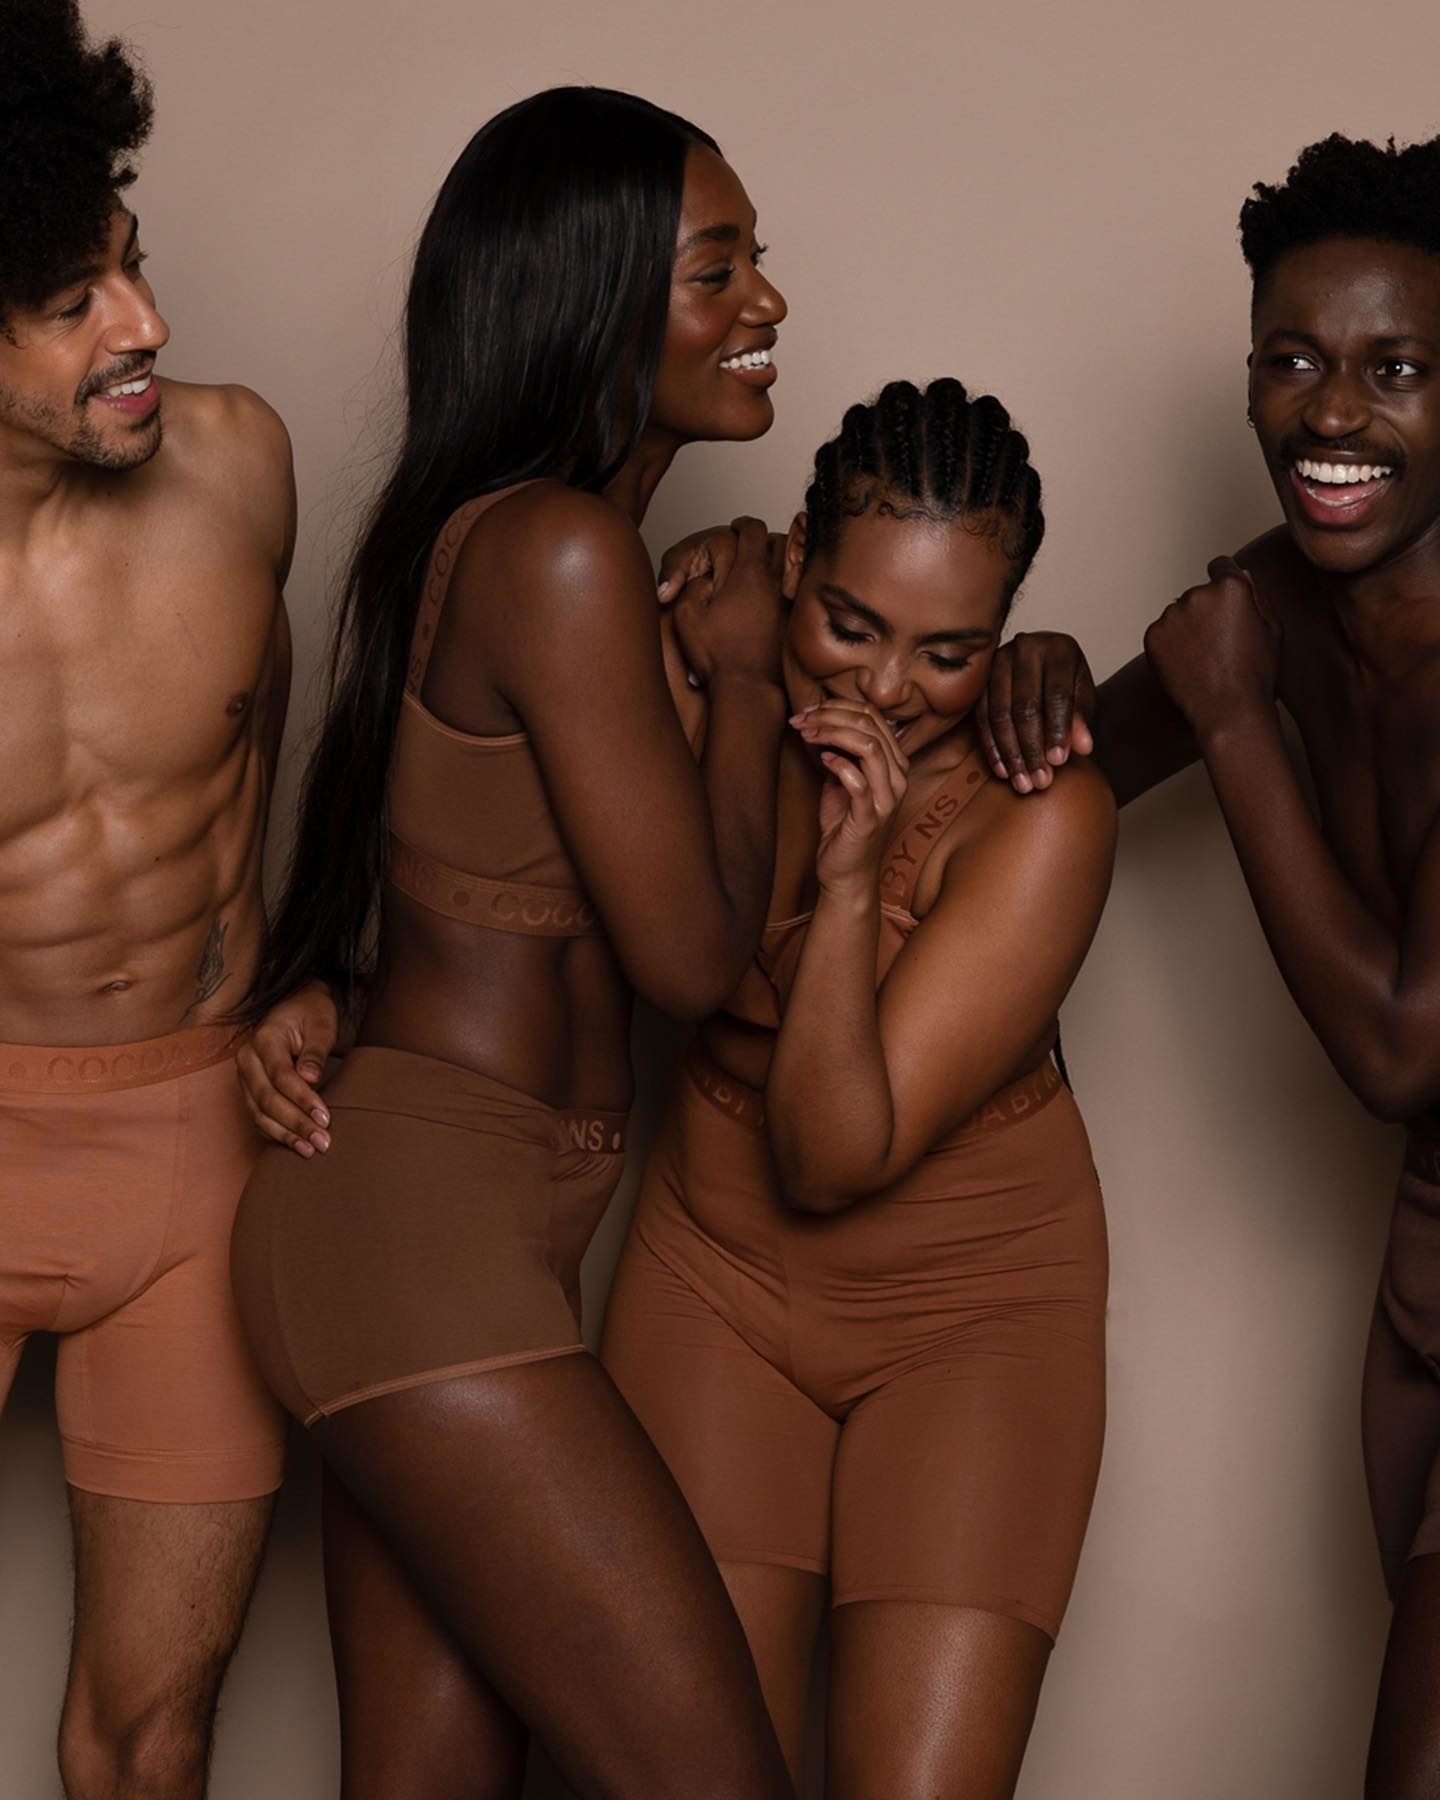 four models wearing different shades of nude underwear and bras